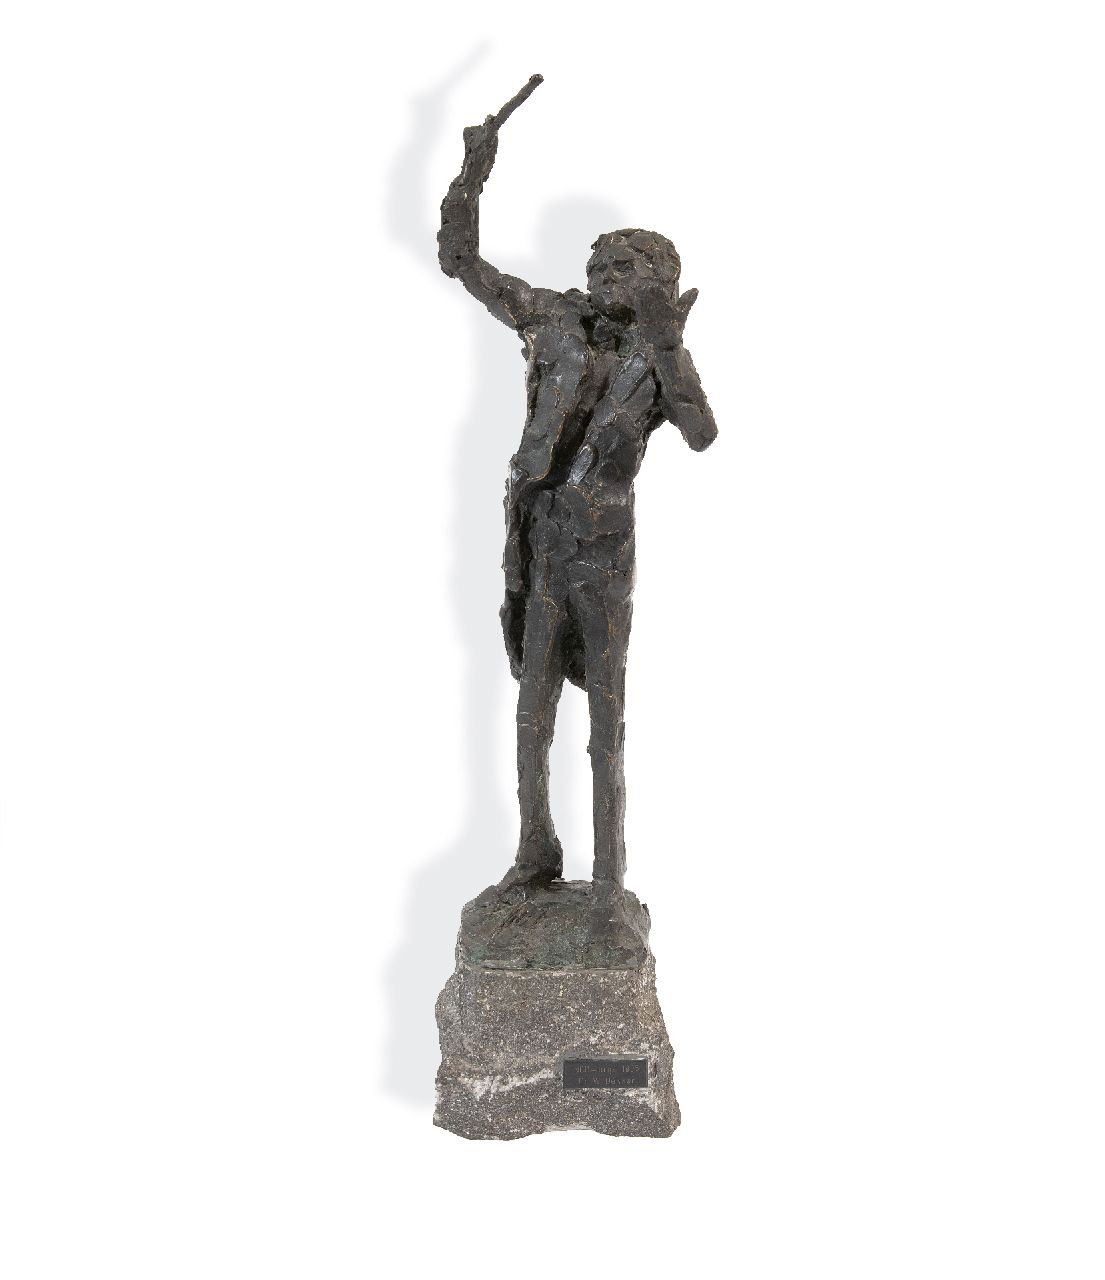 Bakker W.F.  | Willem Frederik 'Jits' Bakker | Sculptures and objects offered for sale | The conductor, bronze 41.0 x 15.0 cm, signed on the base